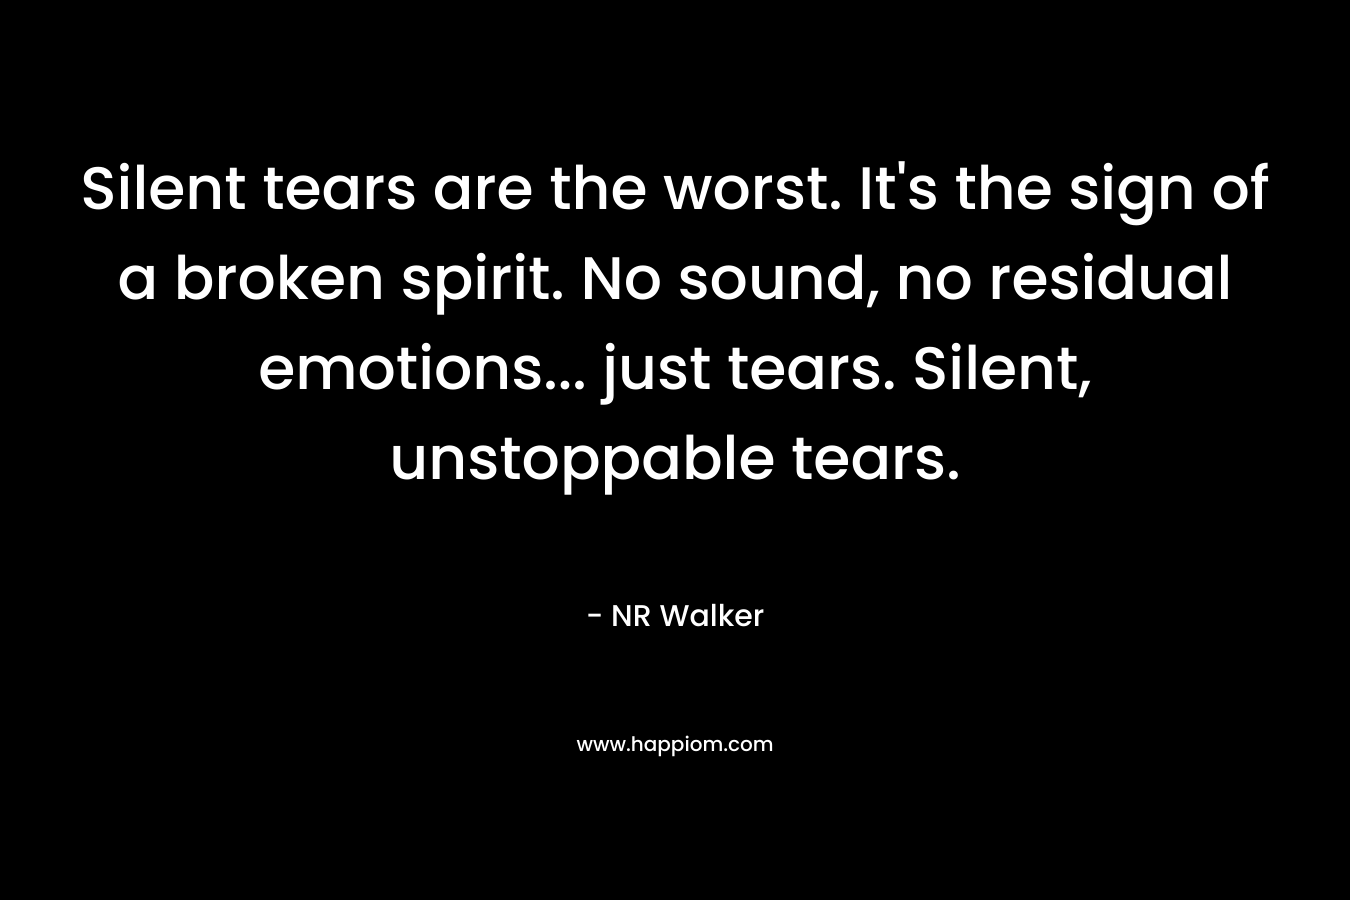 Silent tears are the worst. It's the sign of a broken spirit. No sound, no residual emotions... just tears. Silent, unstoppable tears.